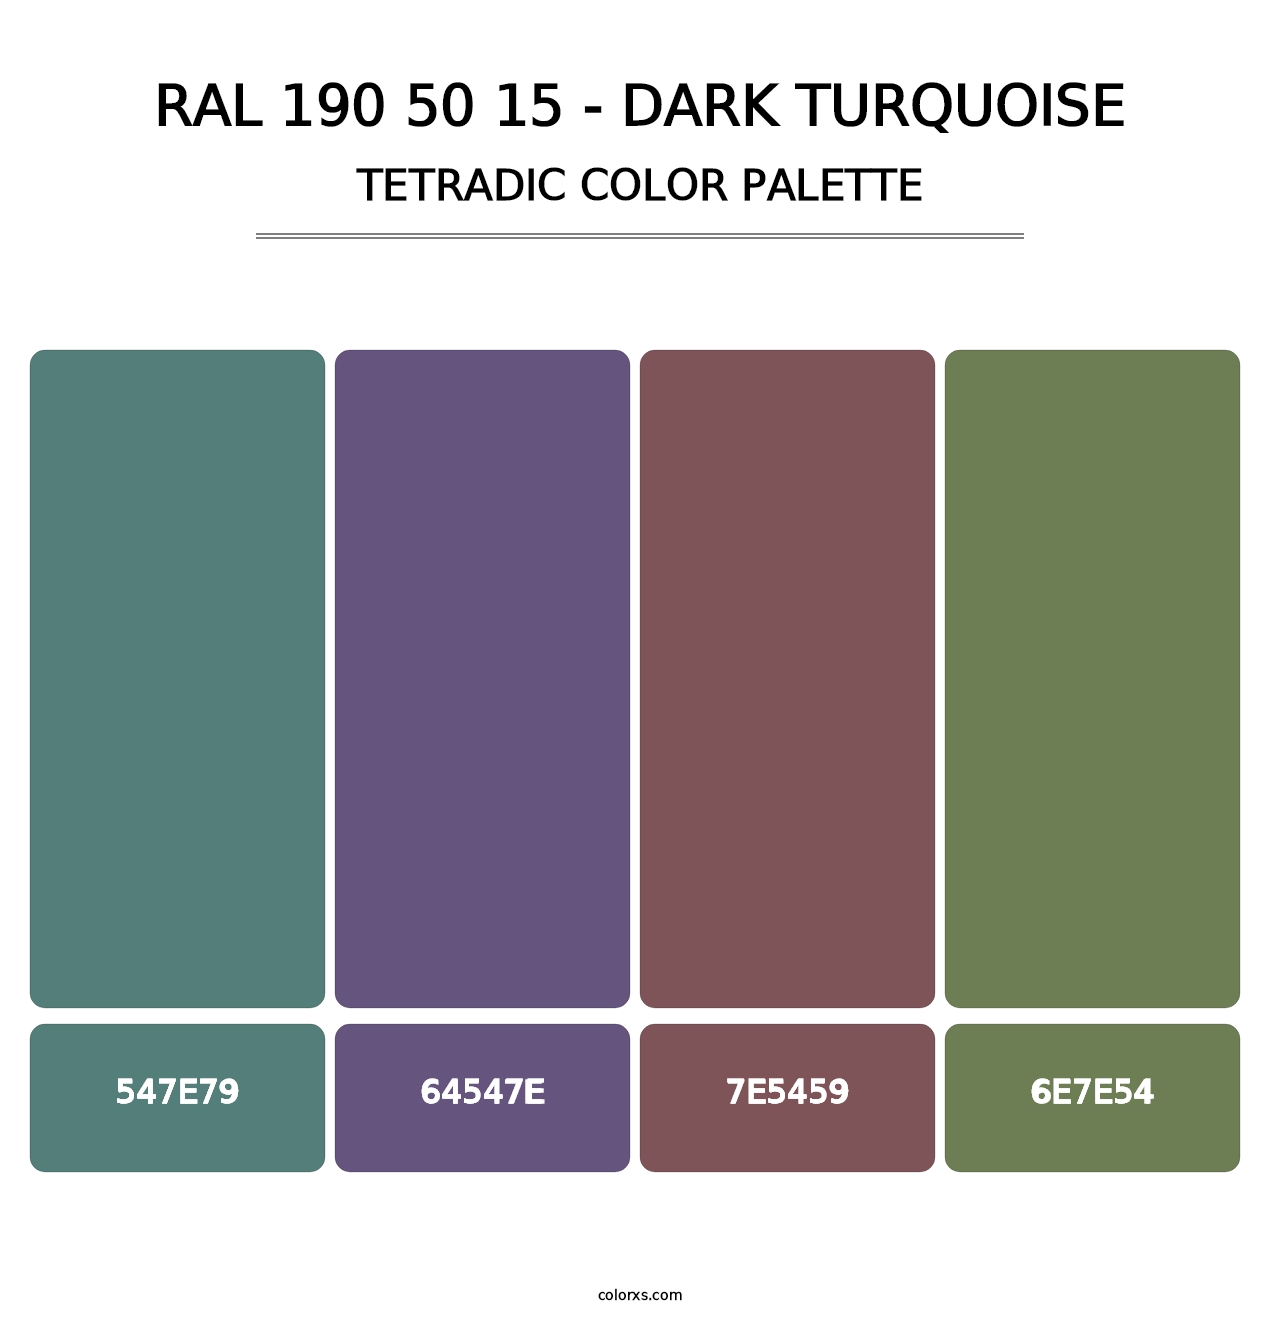 RAL 190 50 15 - Dark Turquoise - Tetradic Color Palette